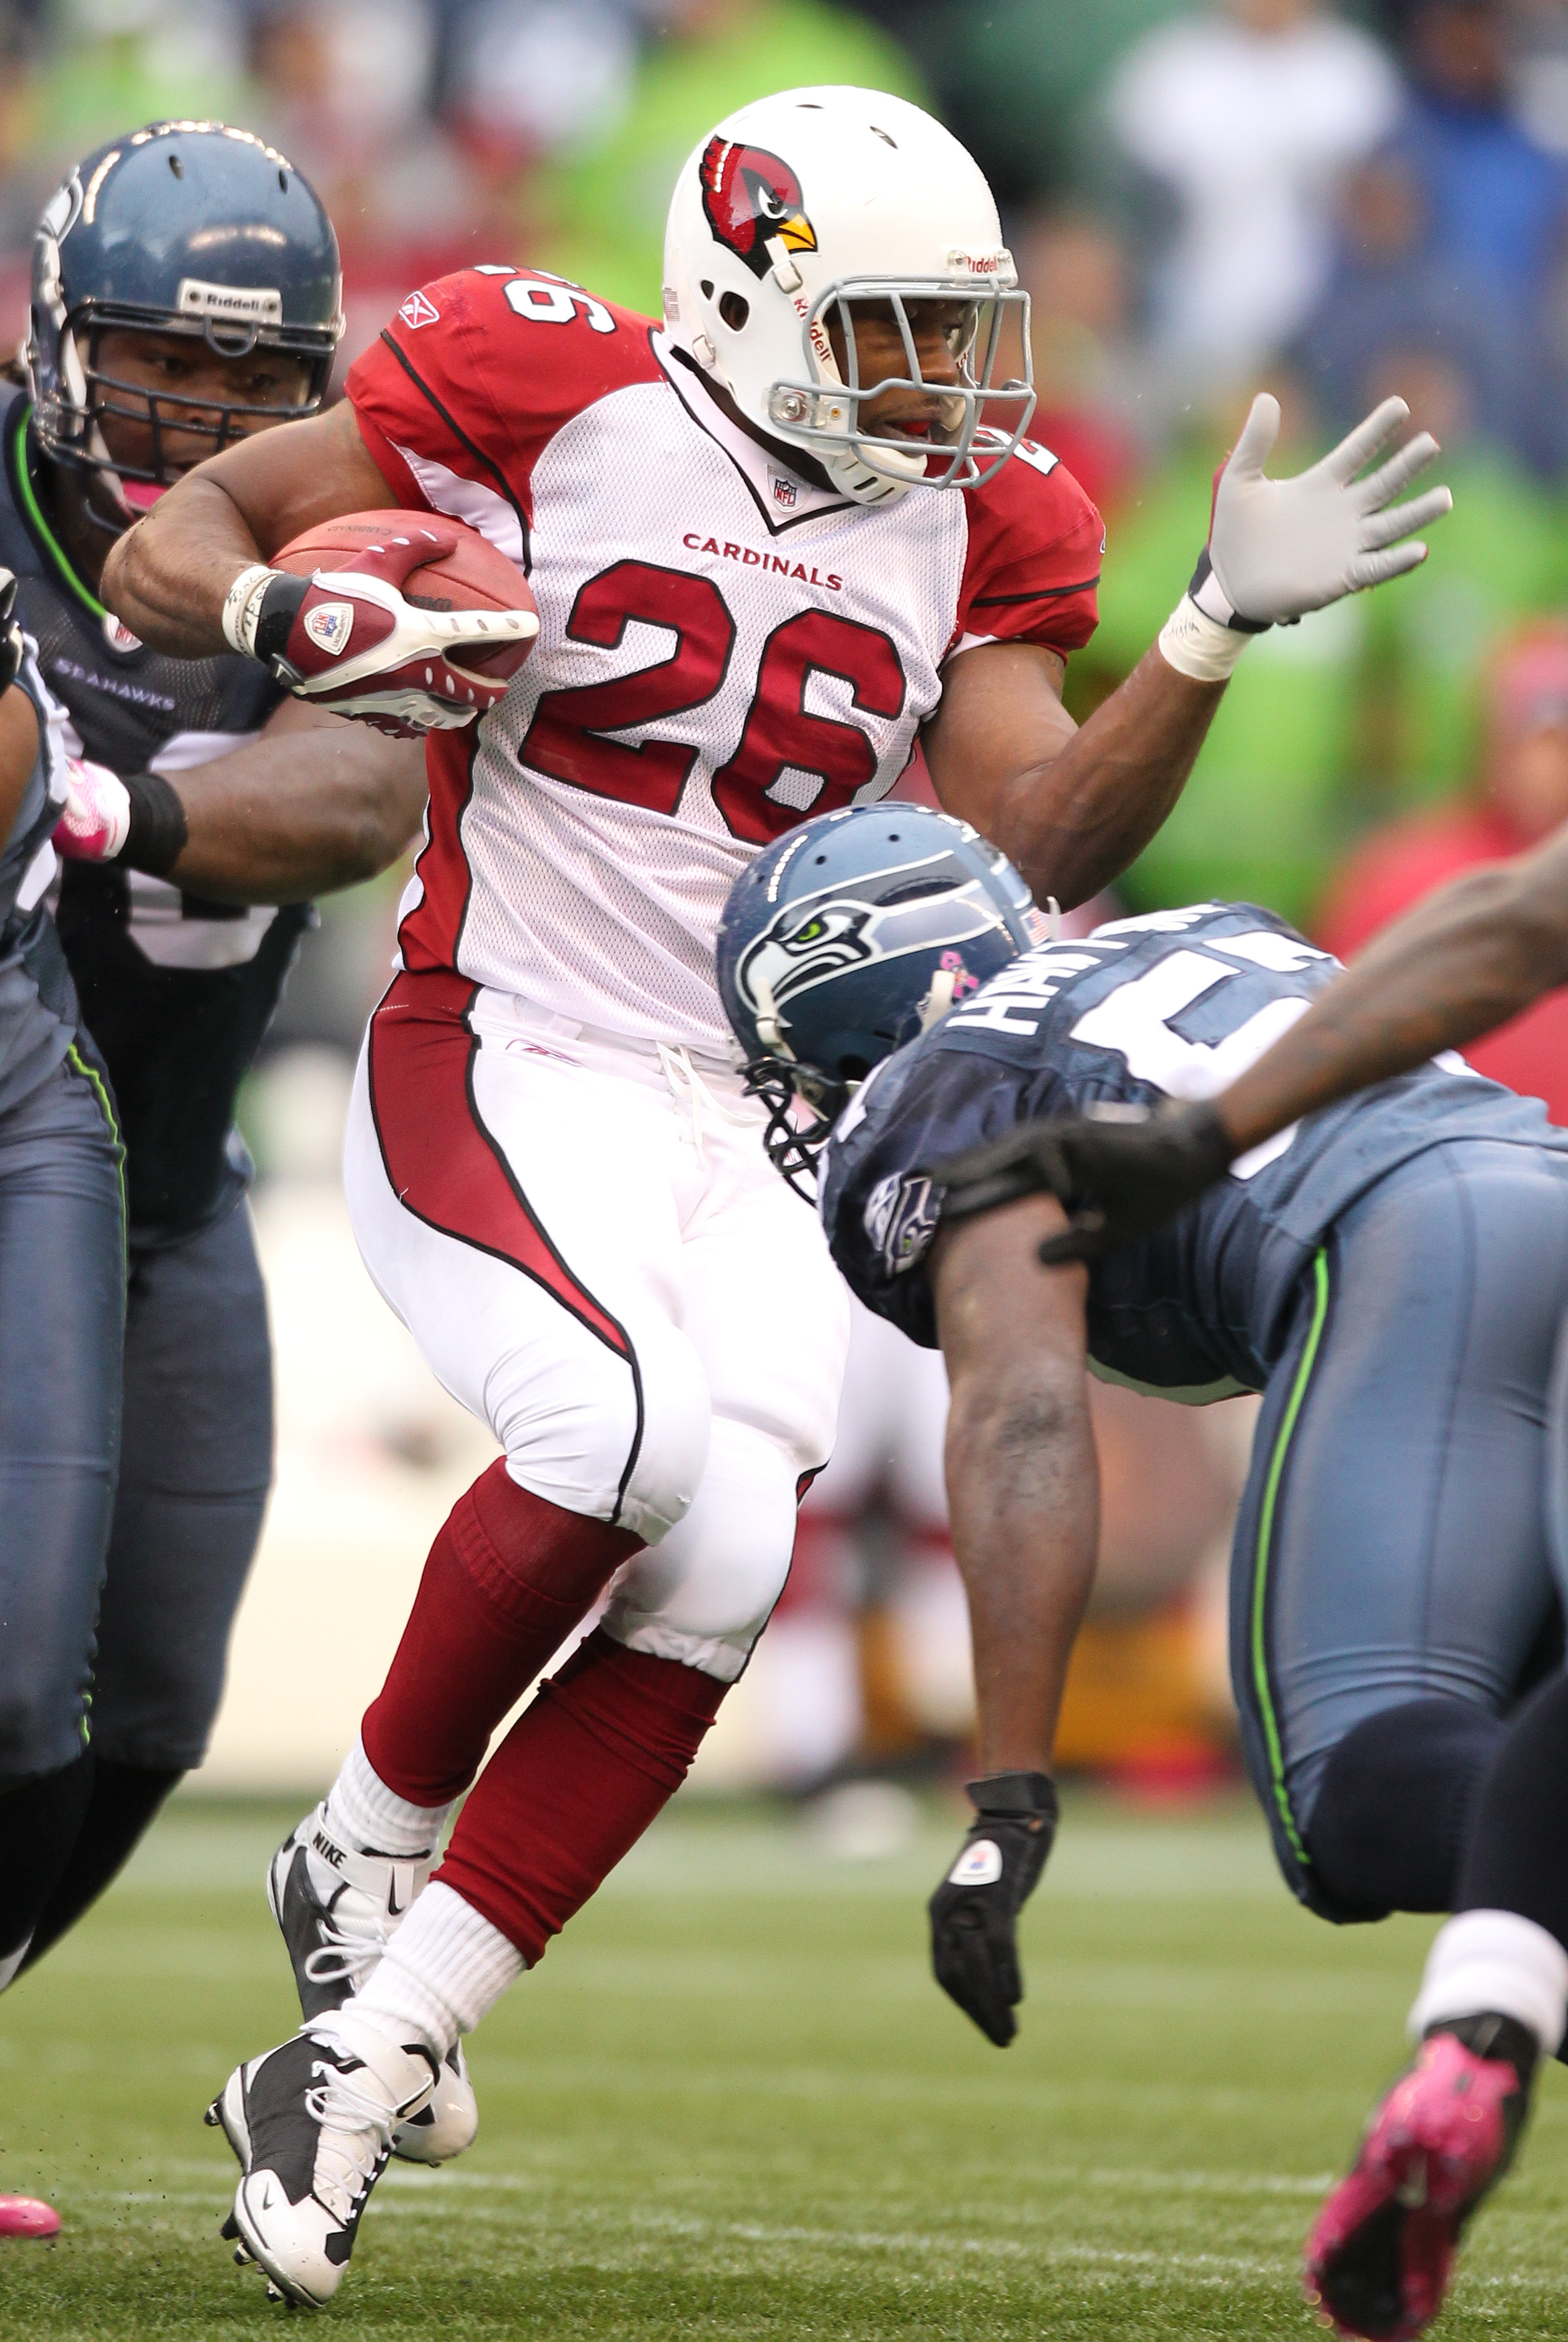 SEATTLE - OCTOBER 24:  Running back Beanie Wells #26 of the Arizona Cardinals rushes against the Seattle Seahawks at Qwest Field on October 24, 2010 in Seattle, Washington. (Photo by Otto Greule Jr/Getty Images)